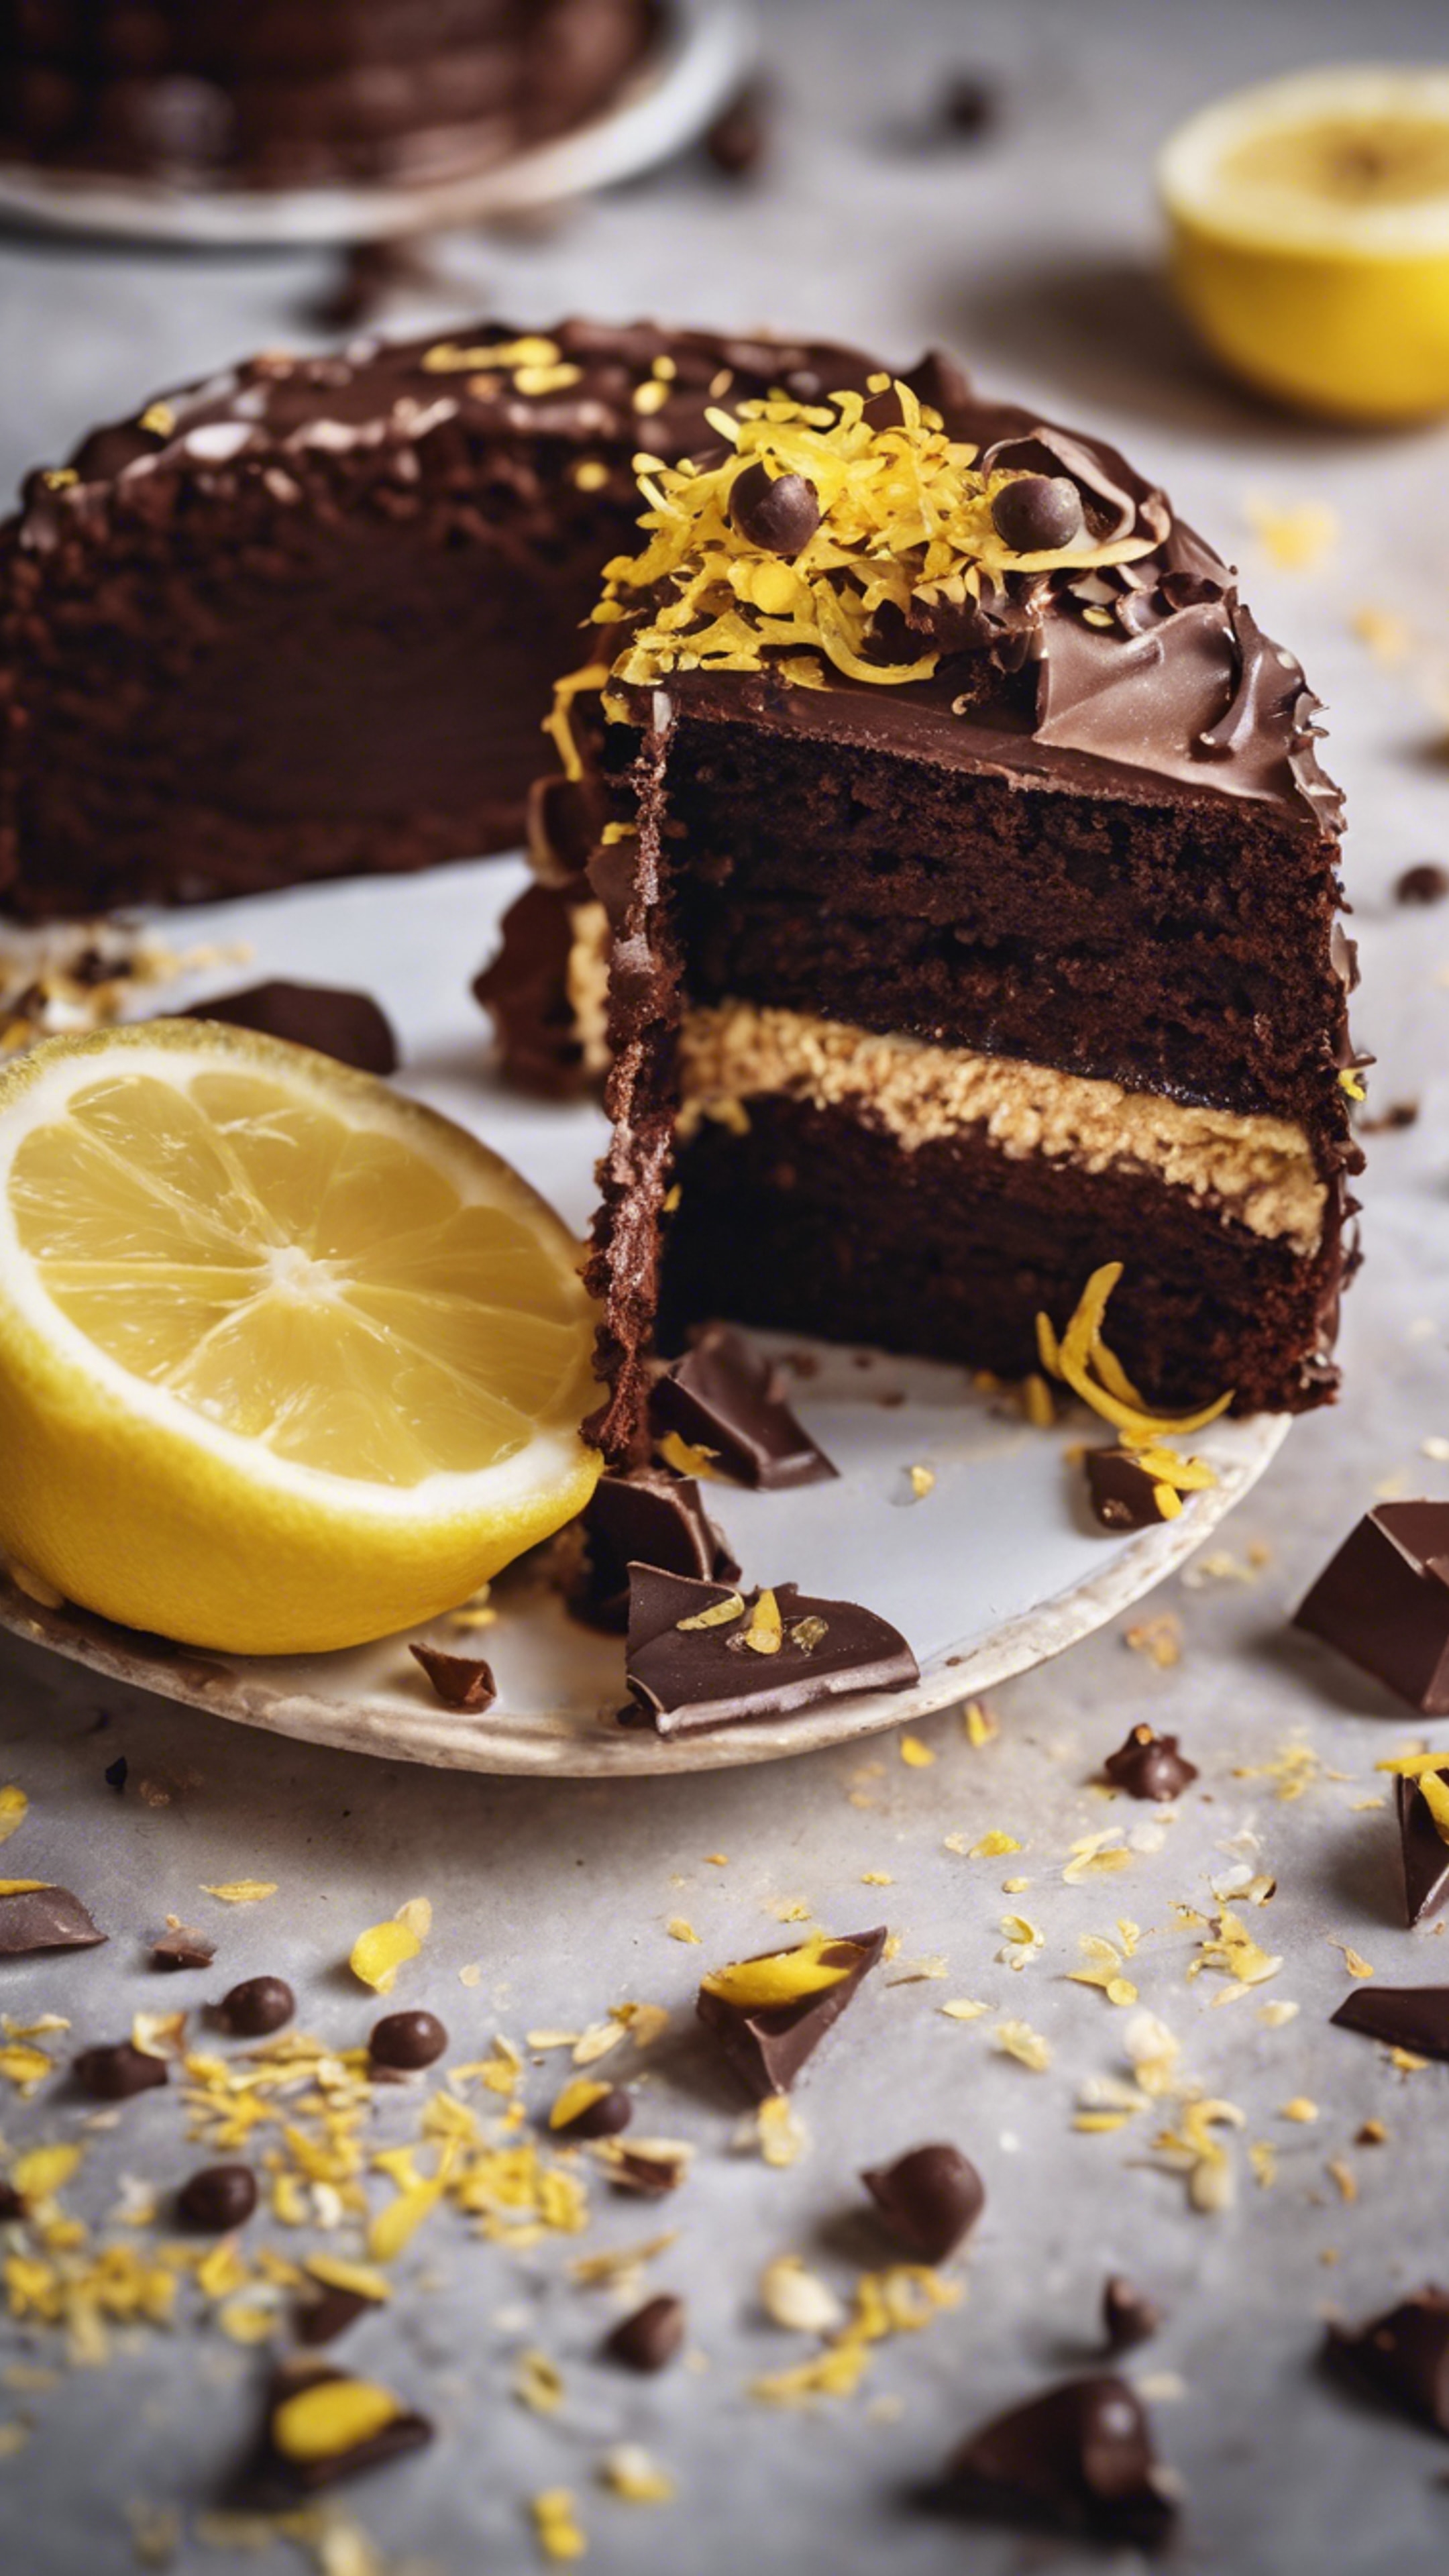 A slice of rich chocolate cake with yellow lemon zest sprinkled on top. Шпалери[a5c73c6ece1941b4ba95]